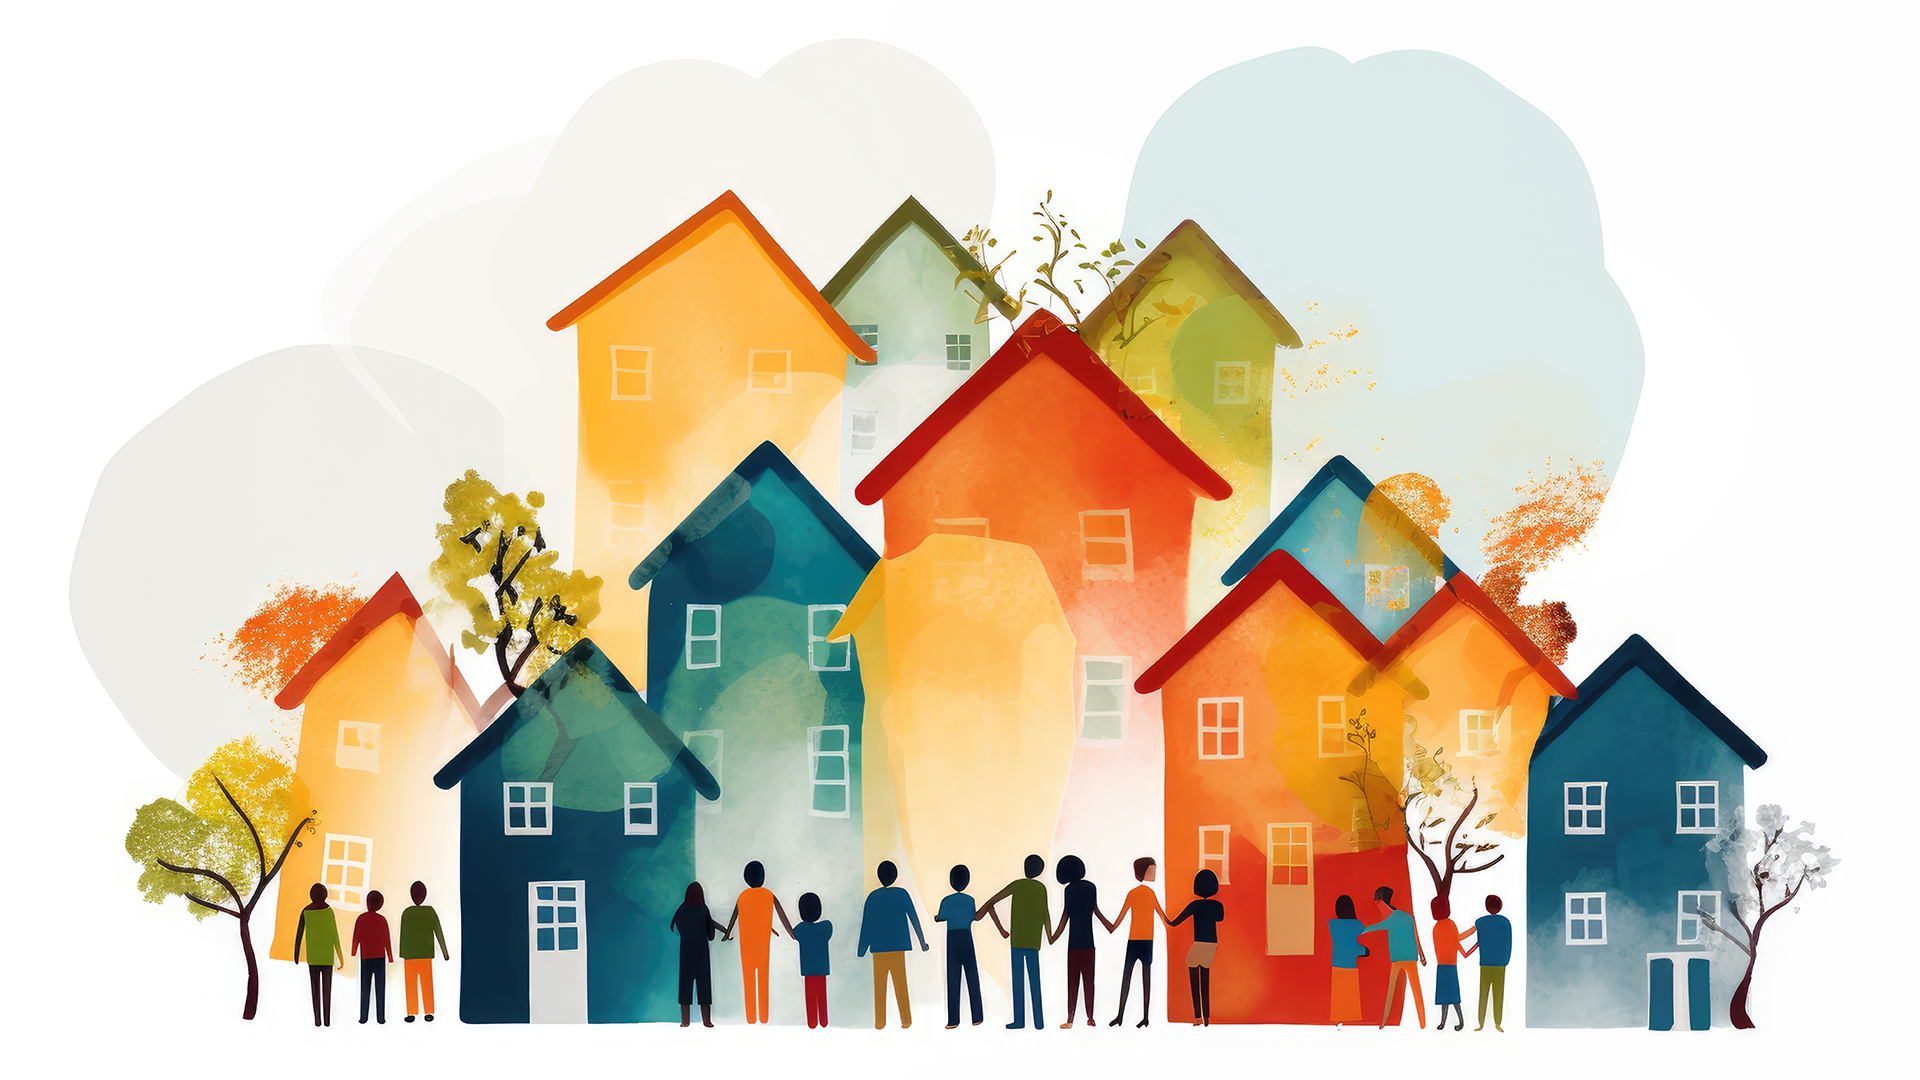 Housing equity and inclusive community